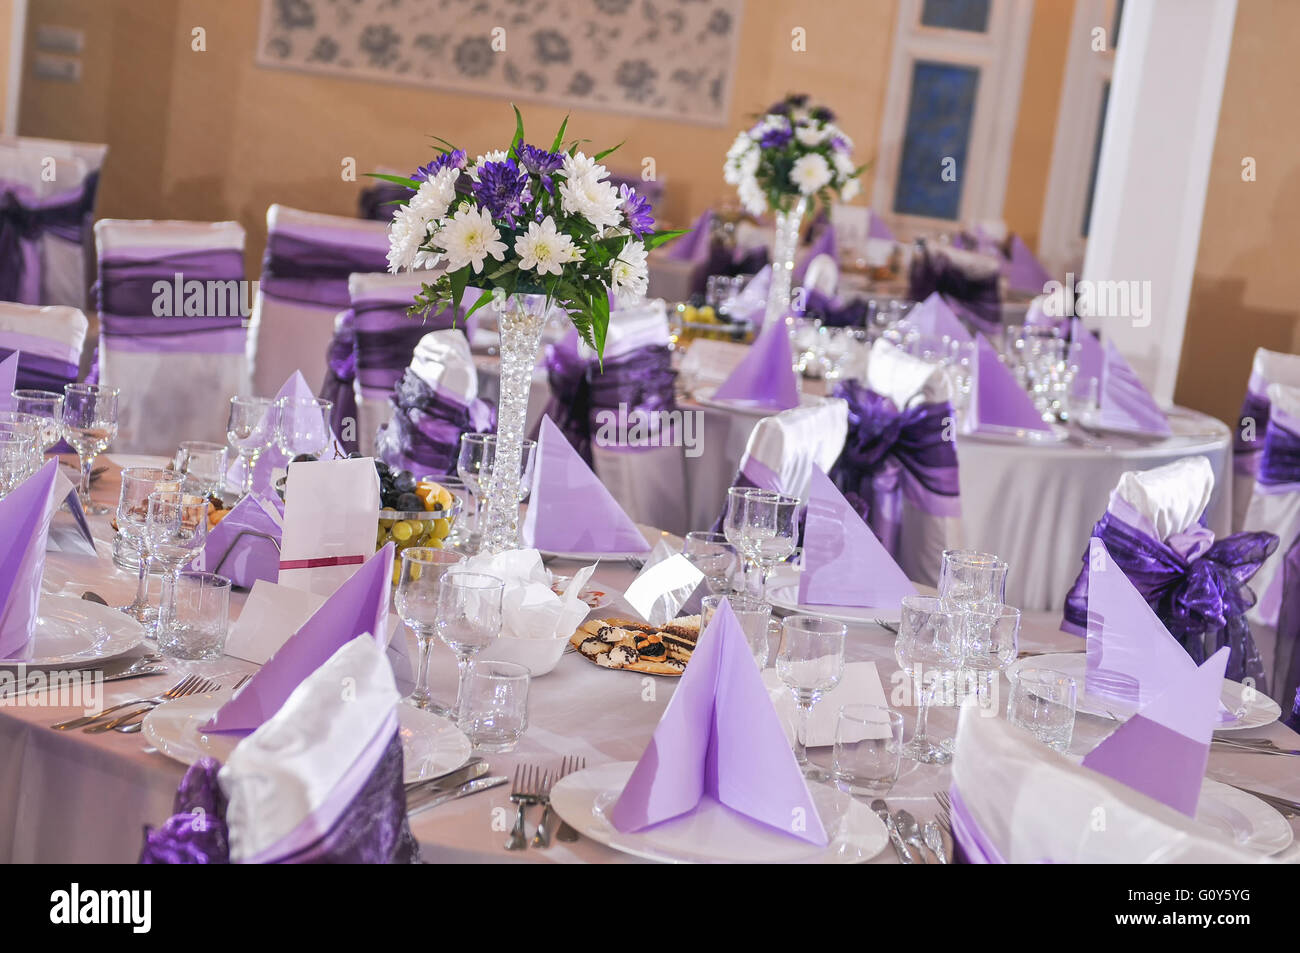 Wedding table with plate, napkin, cutlery on mauve color Stock Photo